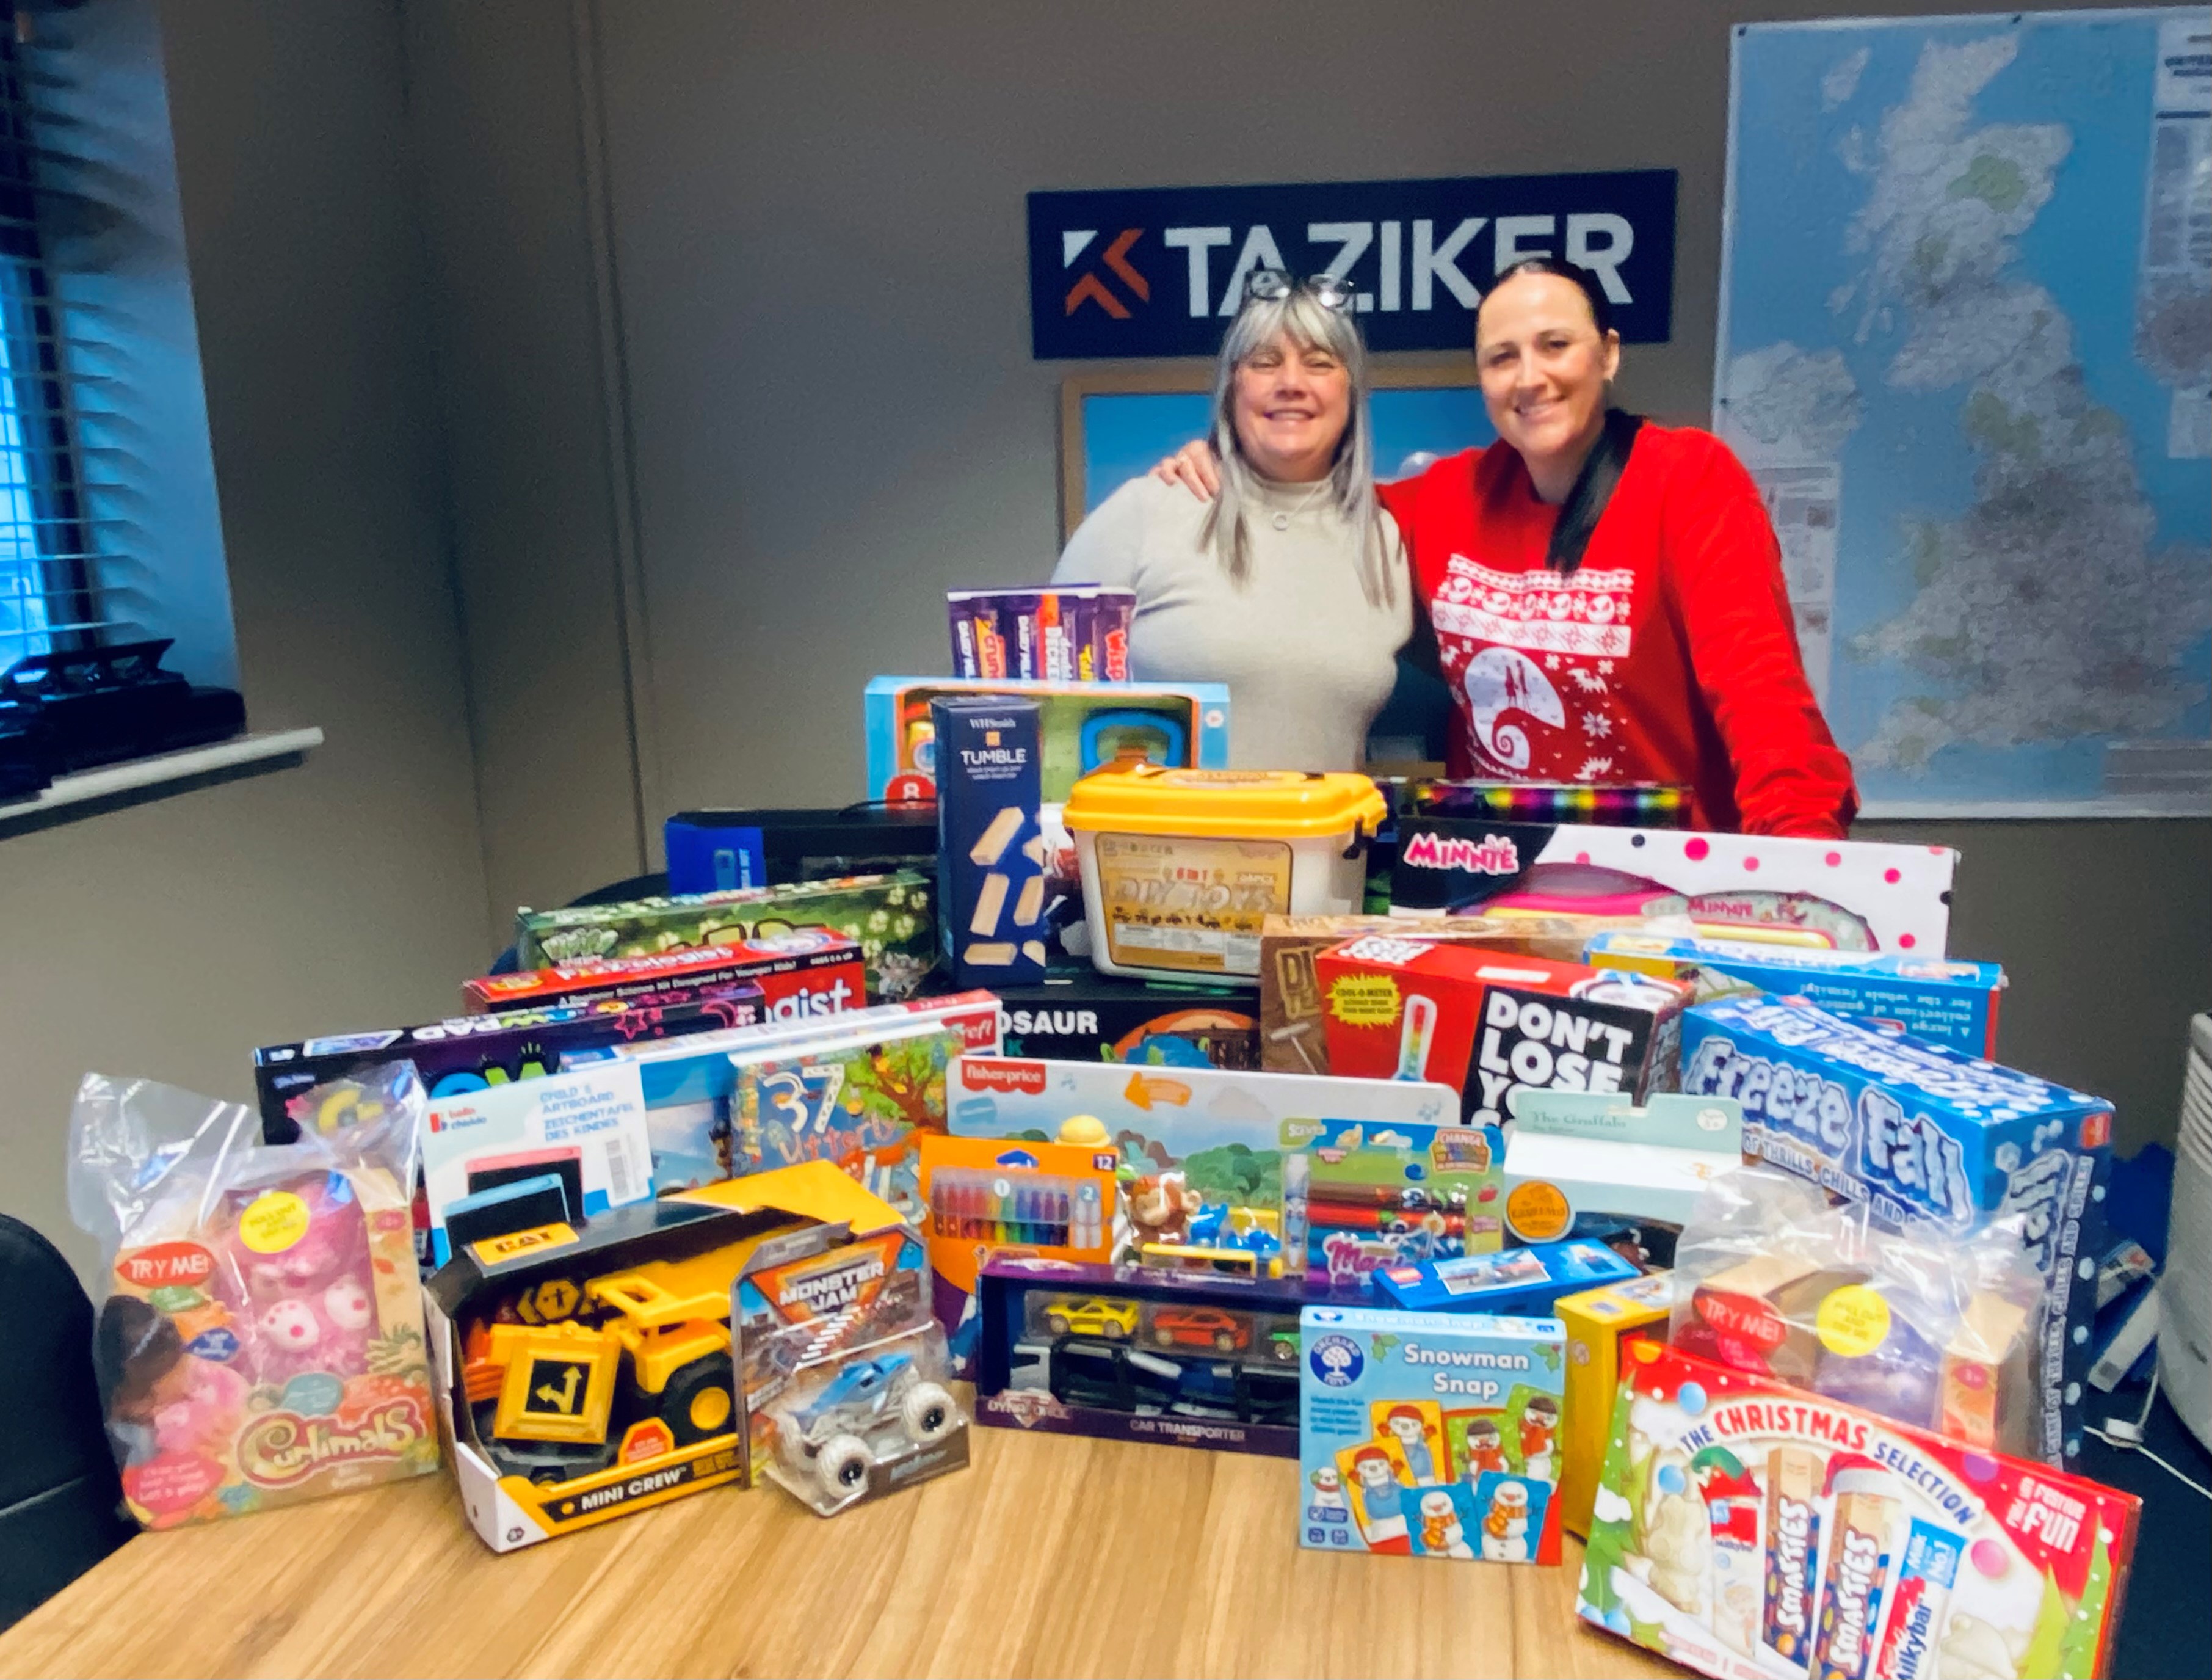 Taziker employees with Christmas presents in the Horwich office.